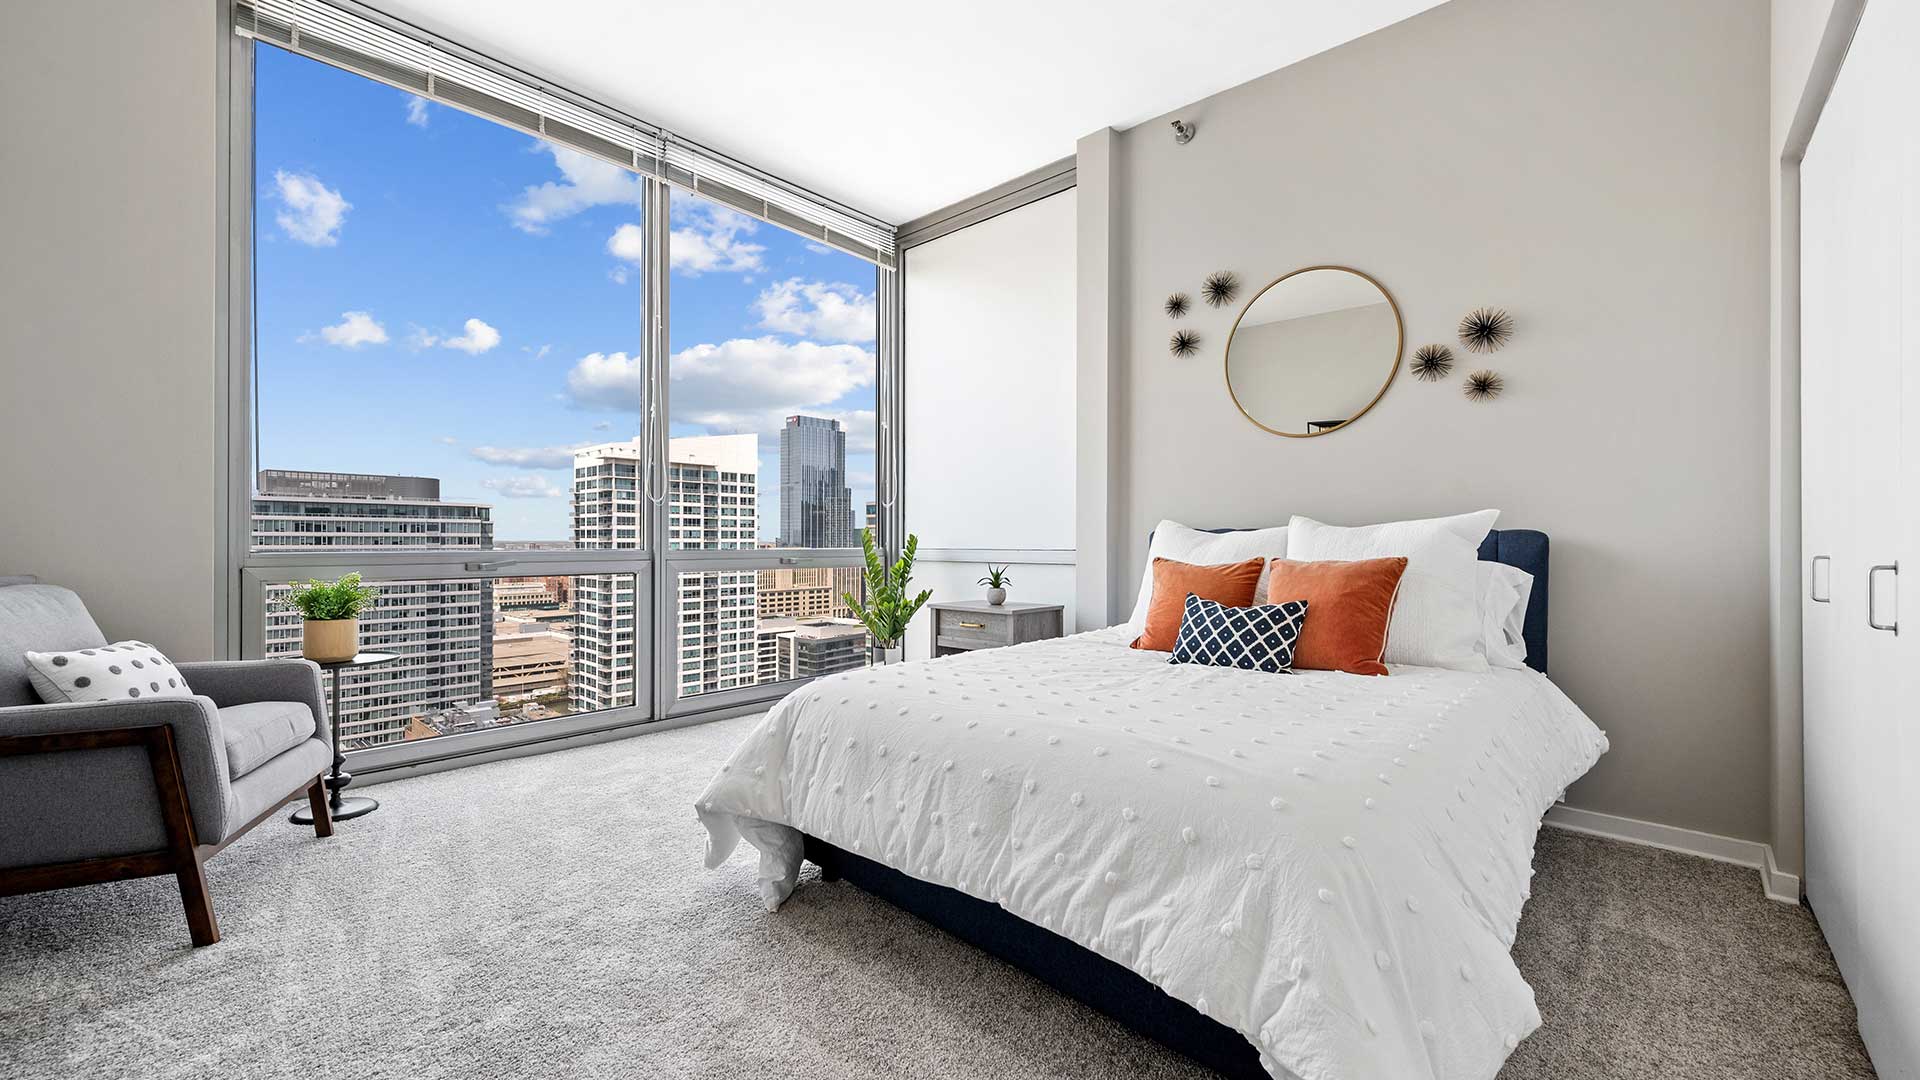 A bedroom in a residence at Burnham Pointe. A large bed is set on the right with floor-to-ceiling windows on the left showing the city outside.